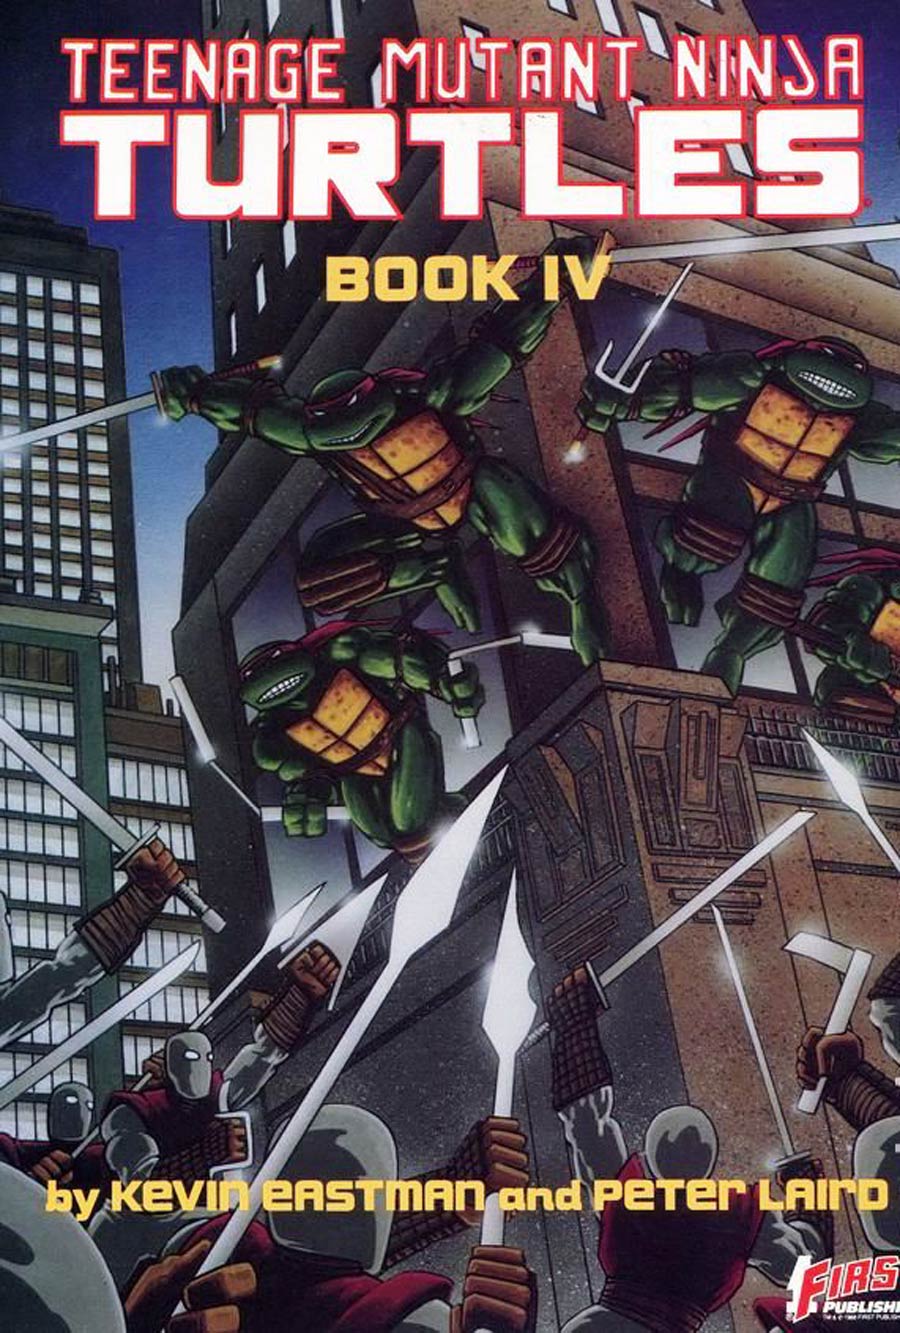 Teenage Mutant Ninja Turtles (First Graphic Novel) TP Book IV Cover A 1st Ptg